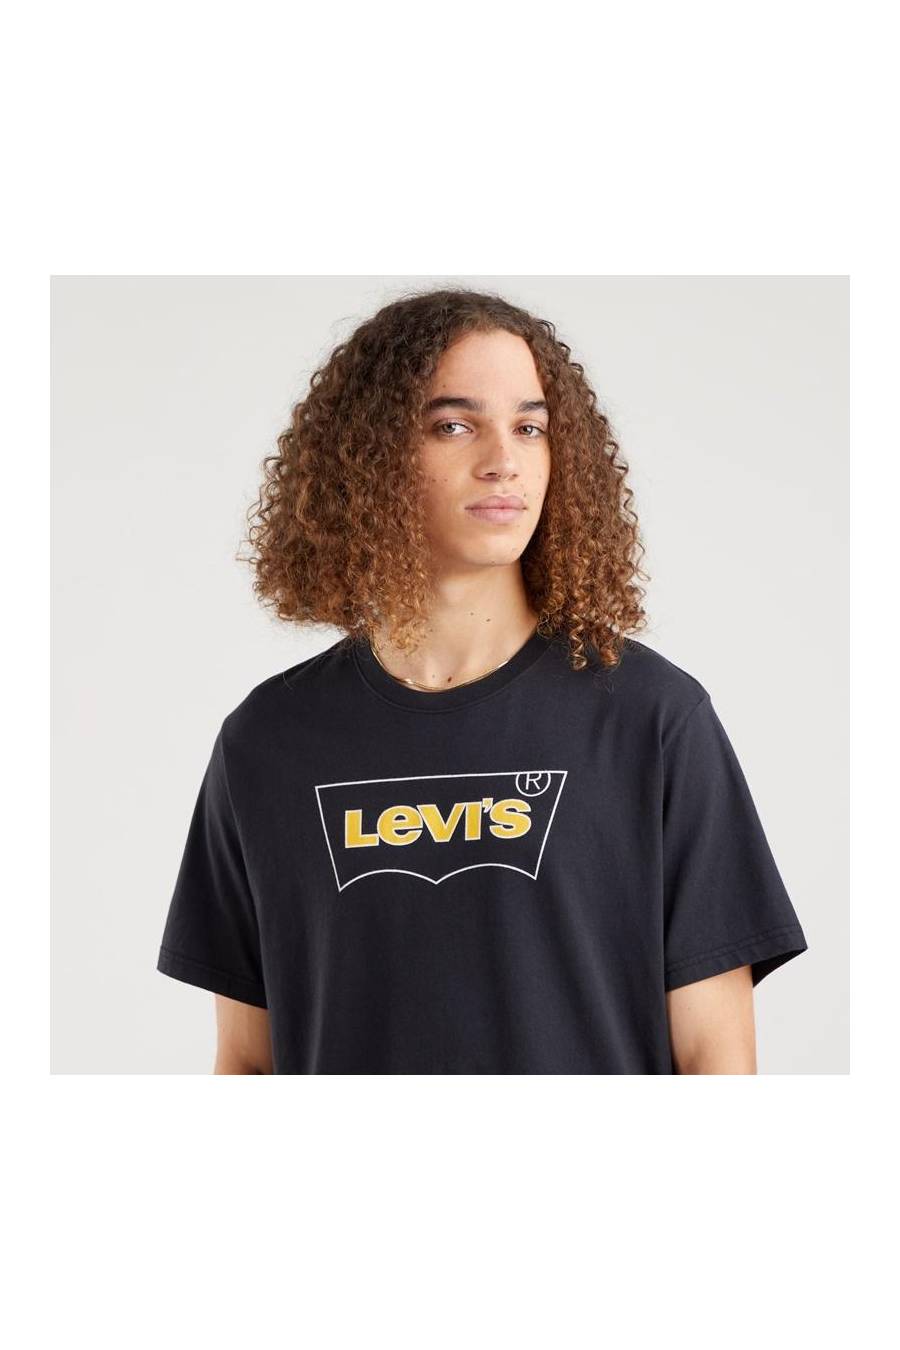 Camiseta Levi's Relaxed Fit Tee 16143-0474